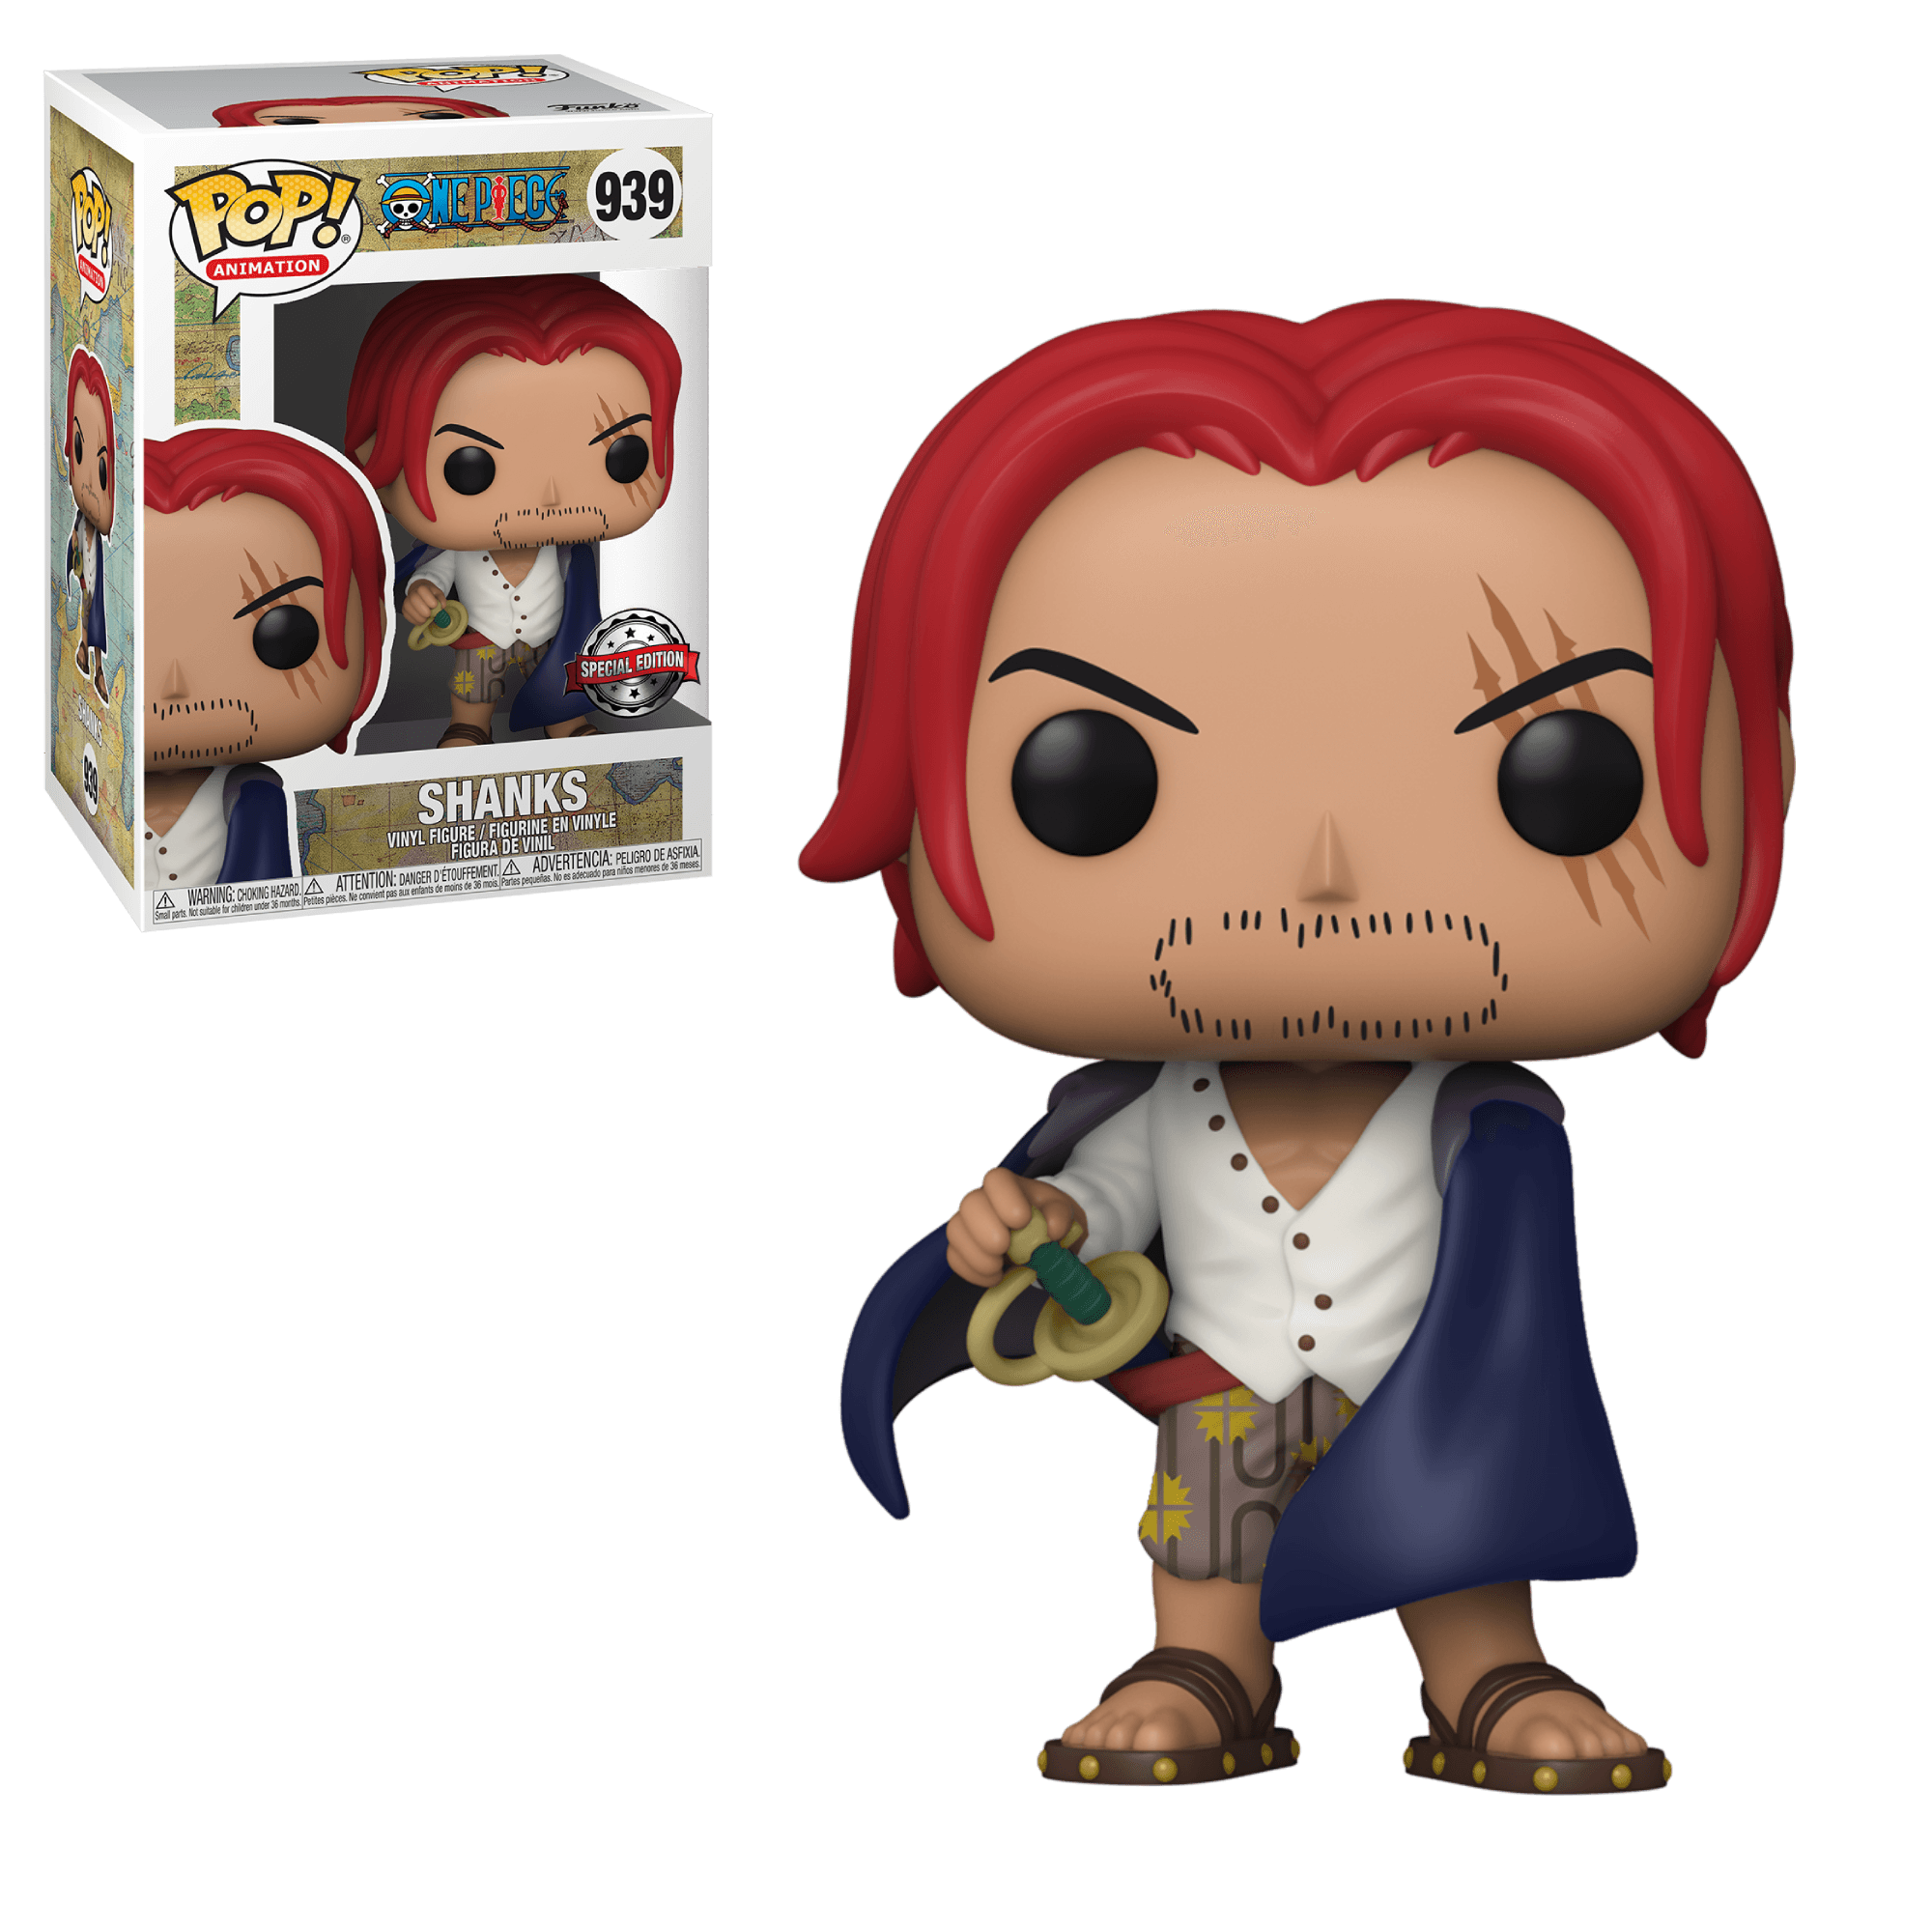 https://coolmerch.gr/wp-content/uploads/2021/09/funko-pop-animation-one-piece-939-shanks-1-in-6-chance-chase-magic-madhouse-exclusive-p371562-383501_zoom.png